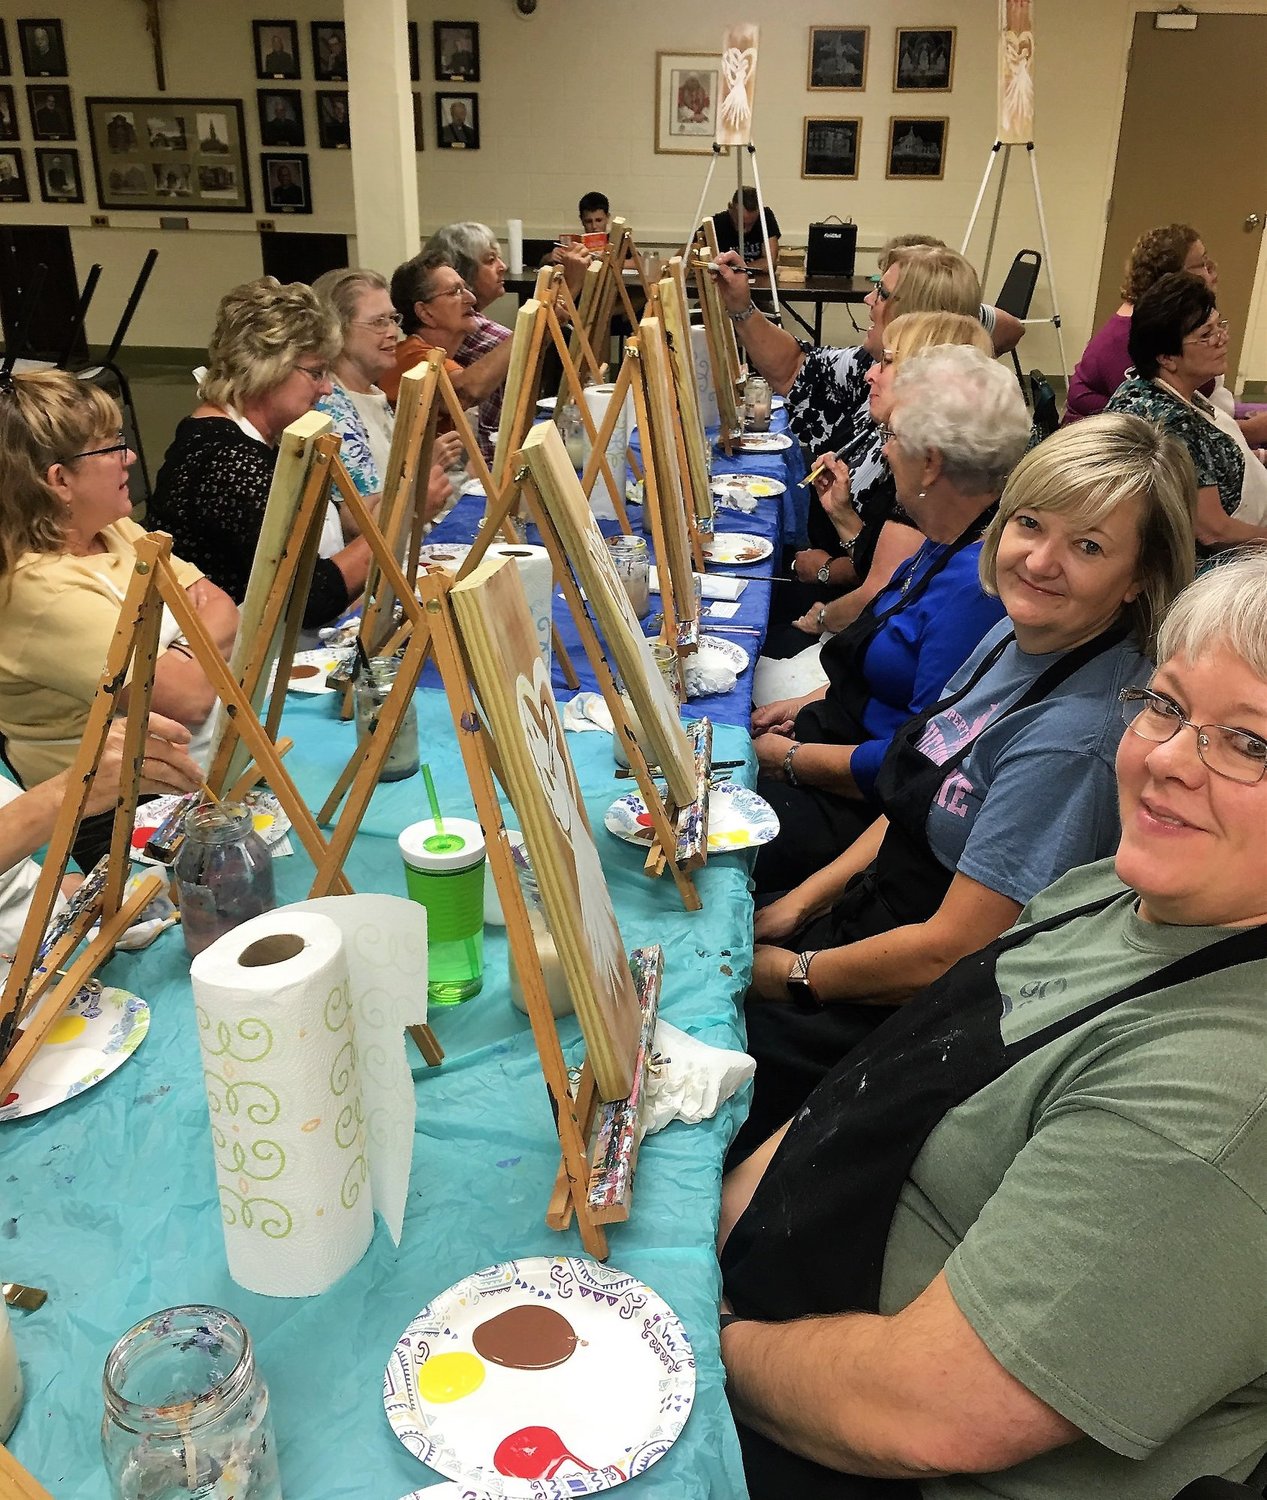 Members of the Daughters of Isabella from all over Missouri take part in a “painting night” activity during their state convention held at Ss. Peter and Paul parish in Boonville.